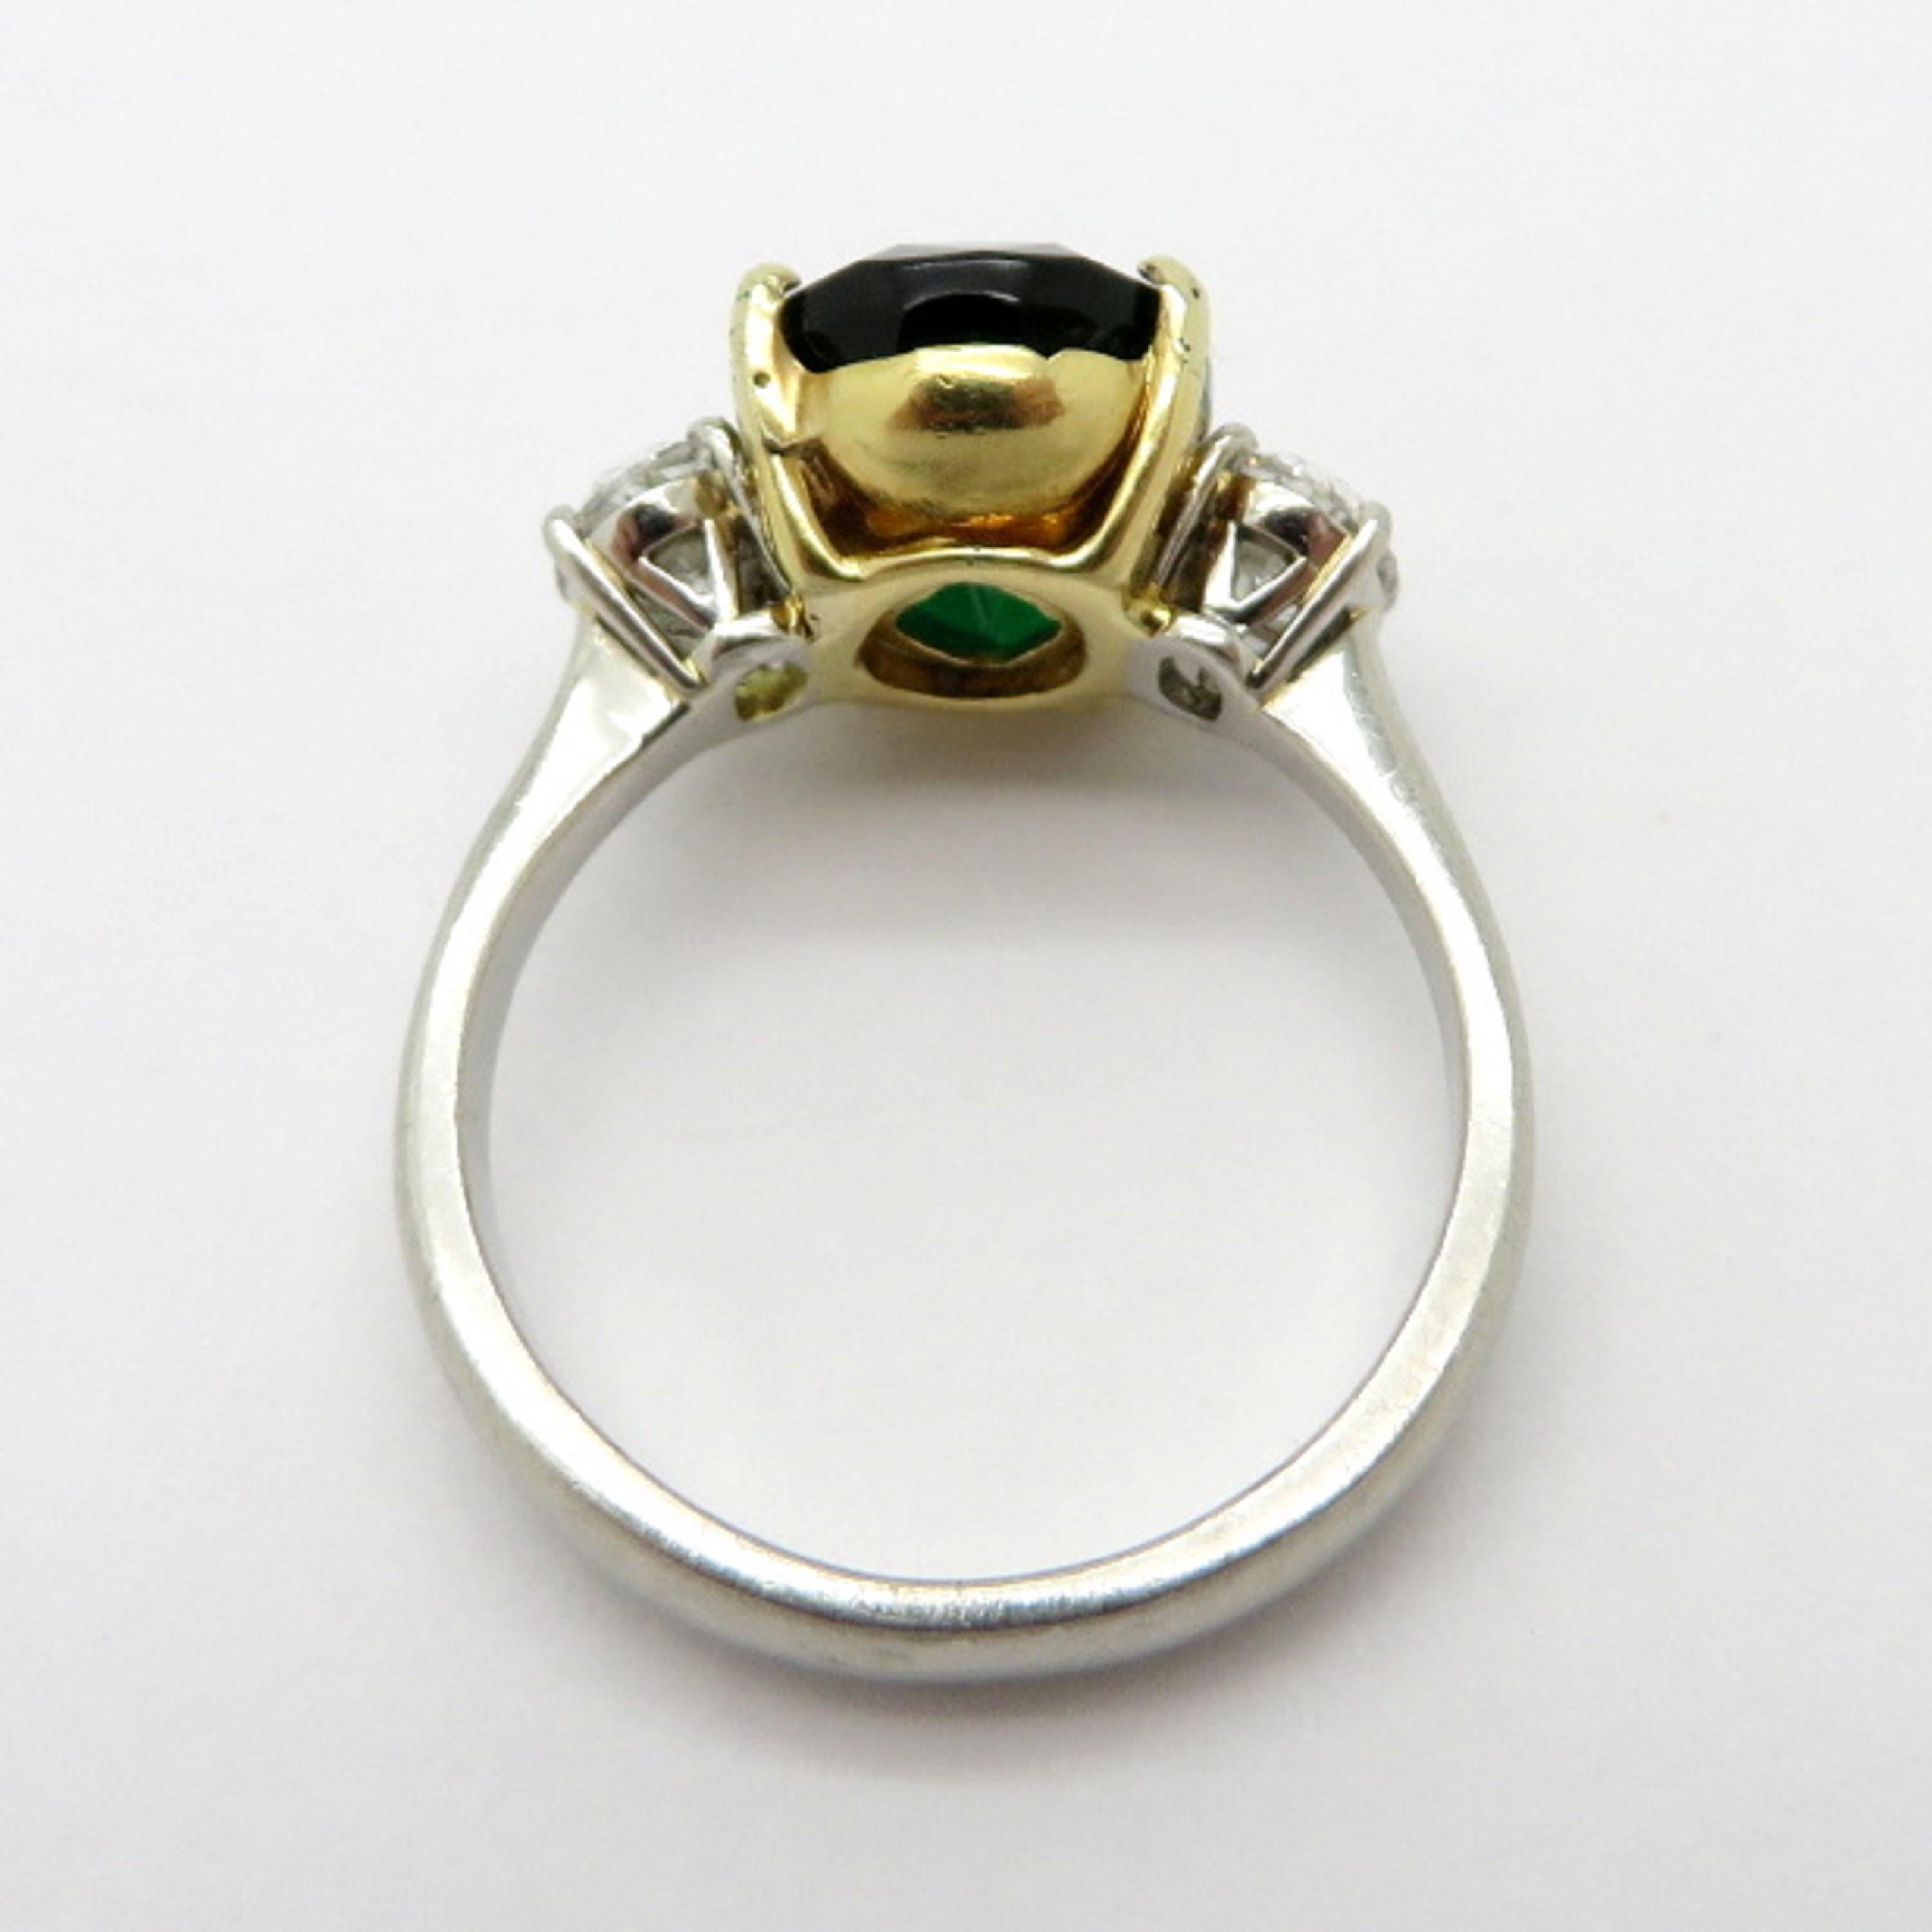 AGL Certified 18 Karat Gold and Platinum 3.77 Carat Oval Zambian Emerald Ring In Excellent Condition For Sale In Scottsdale, AZ